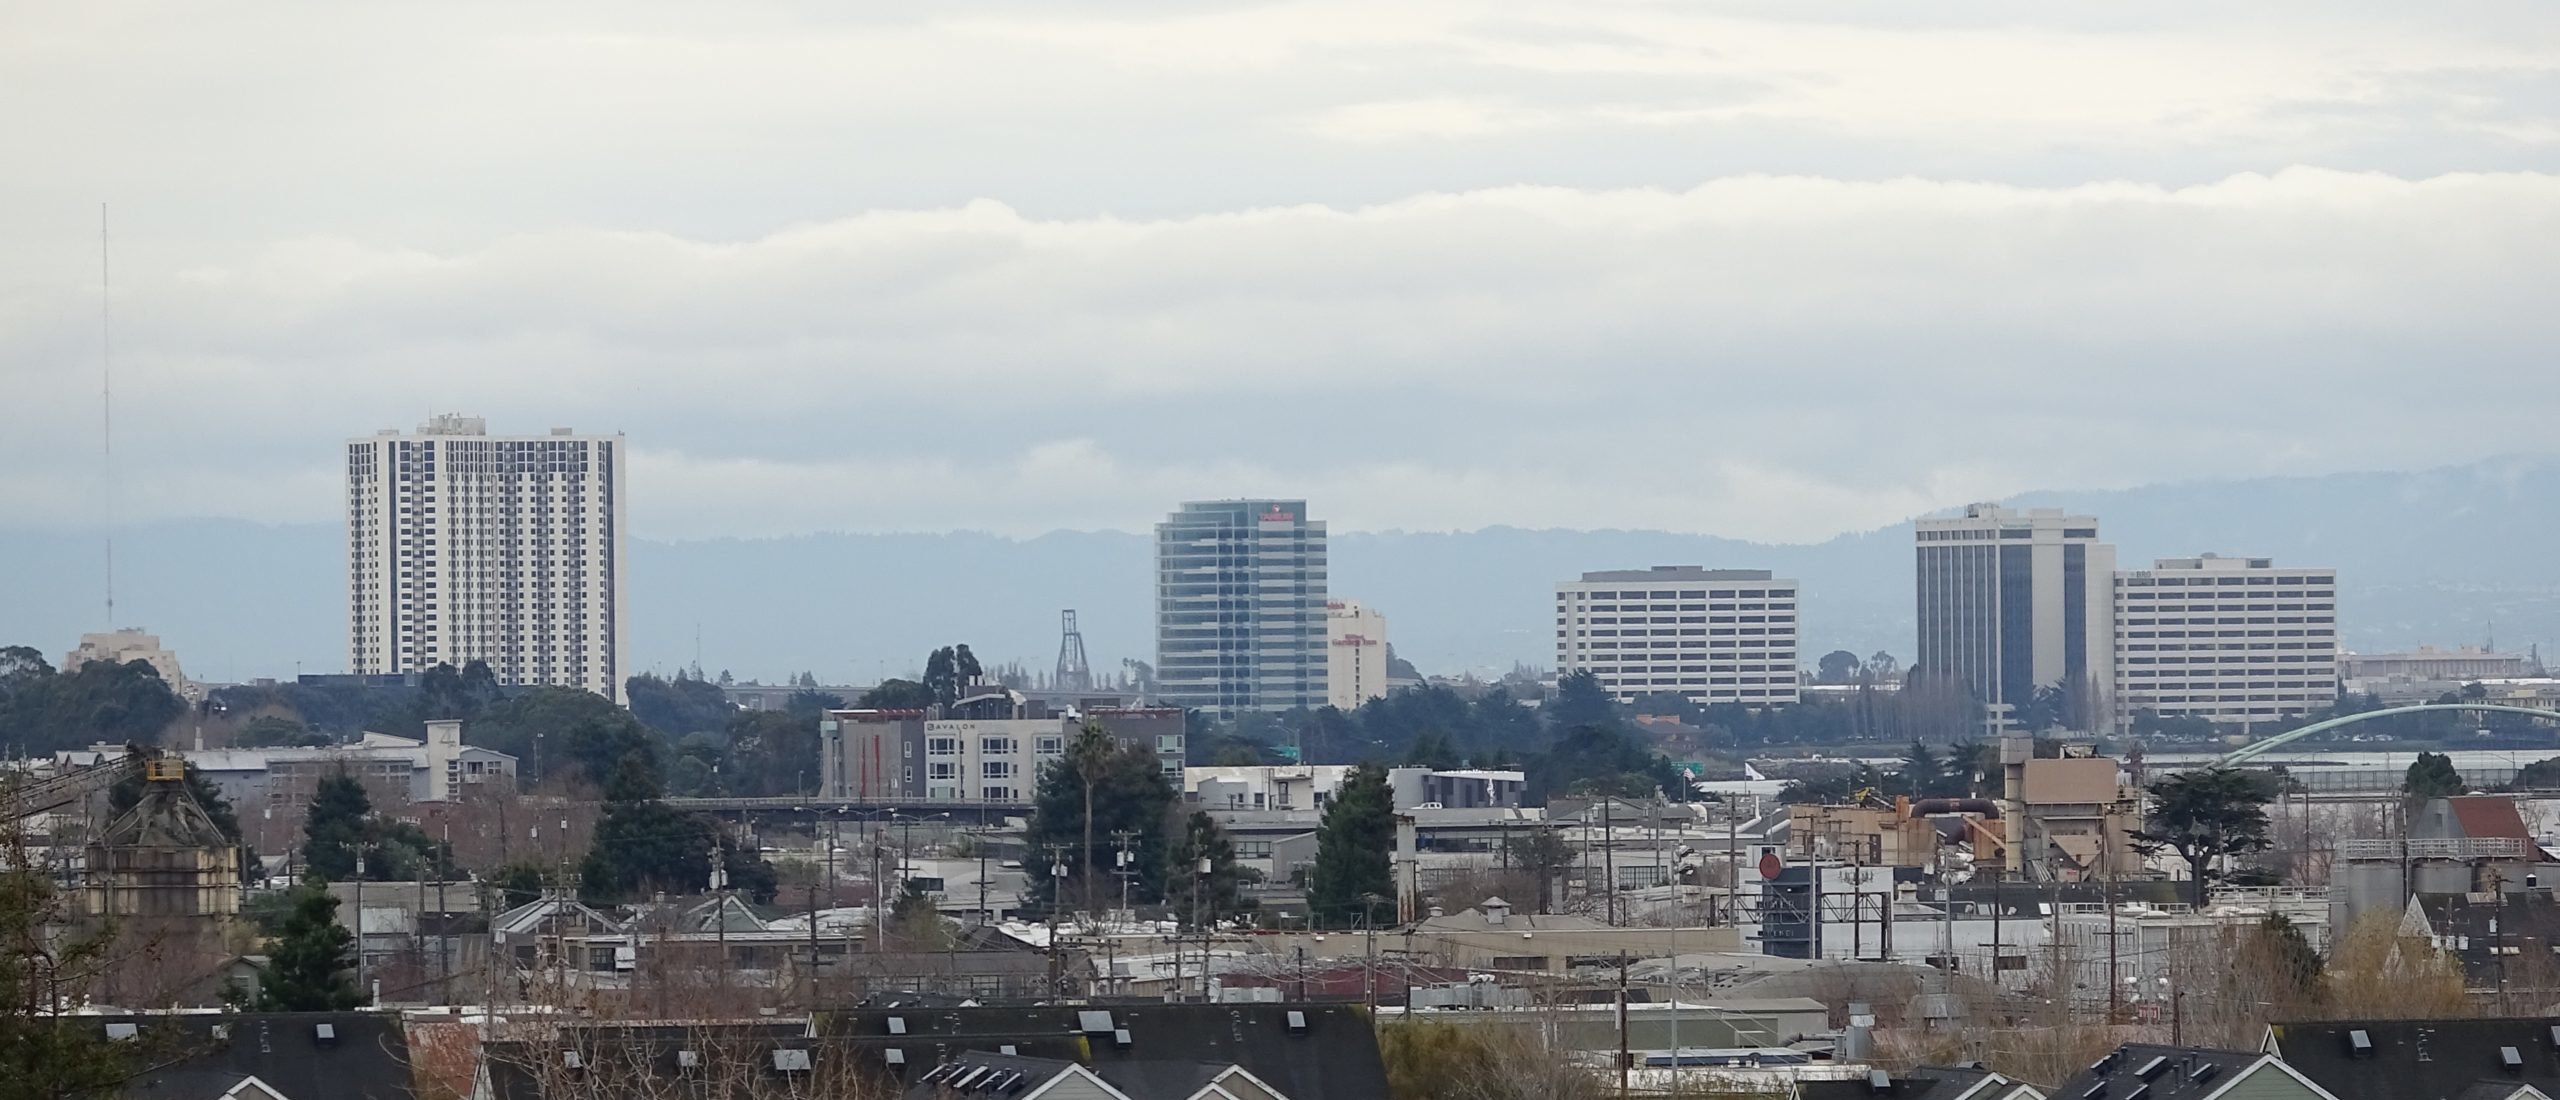 Urban skyline of Oakland, California on an overcast day, January 8, 2019. (Photo by Smith Collection/Gado/Getty Images)